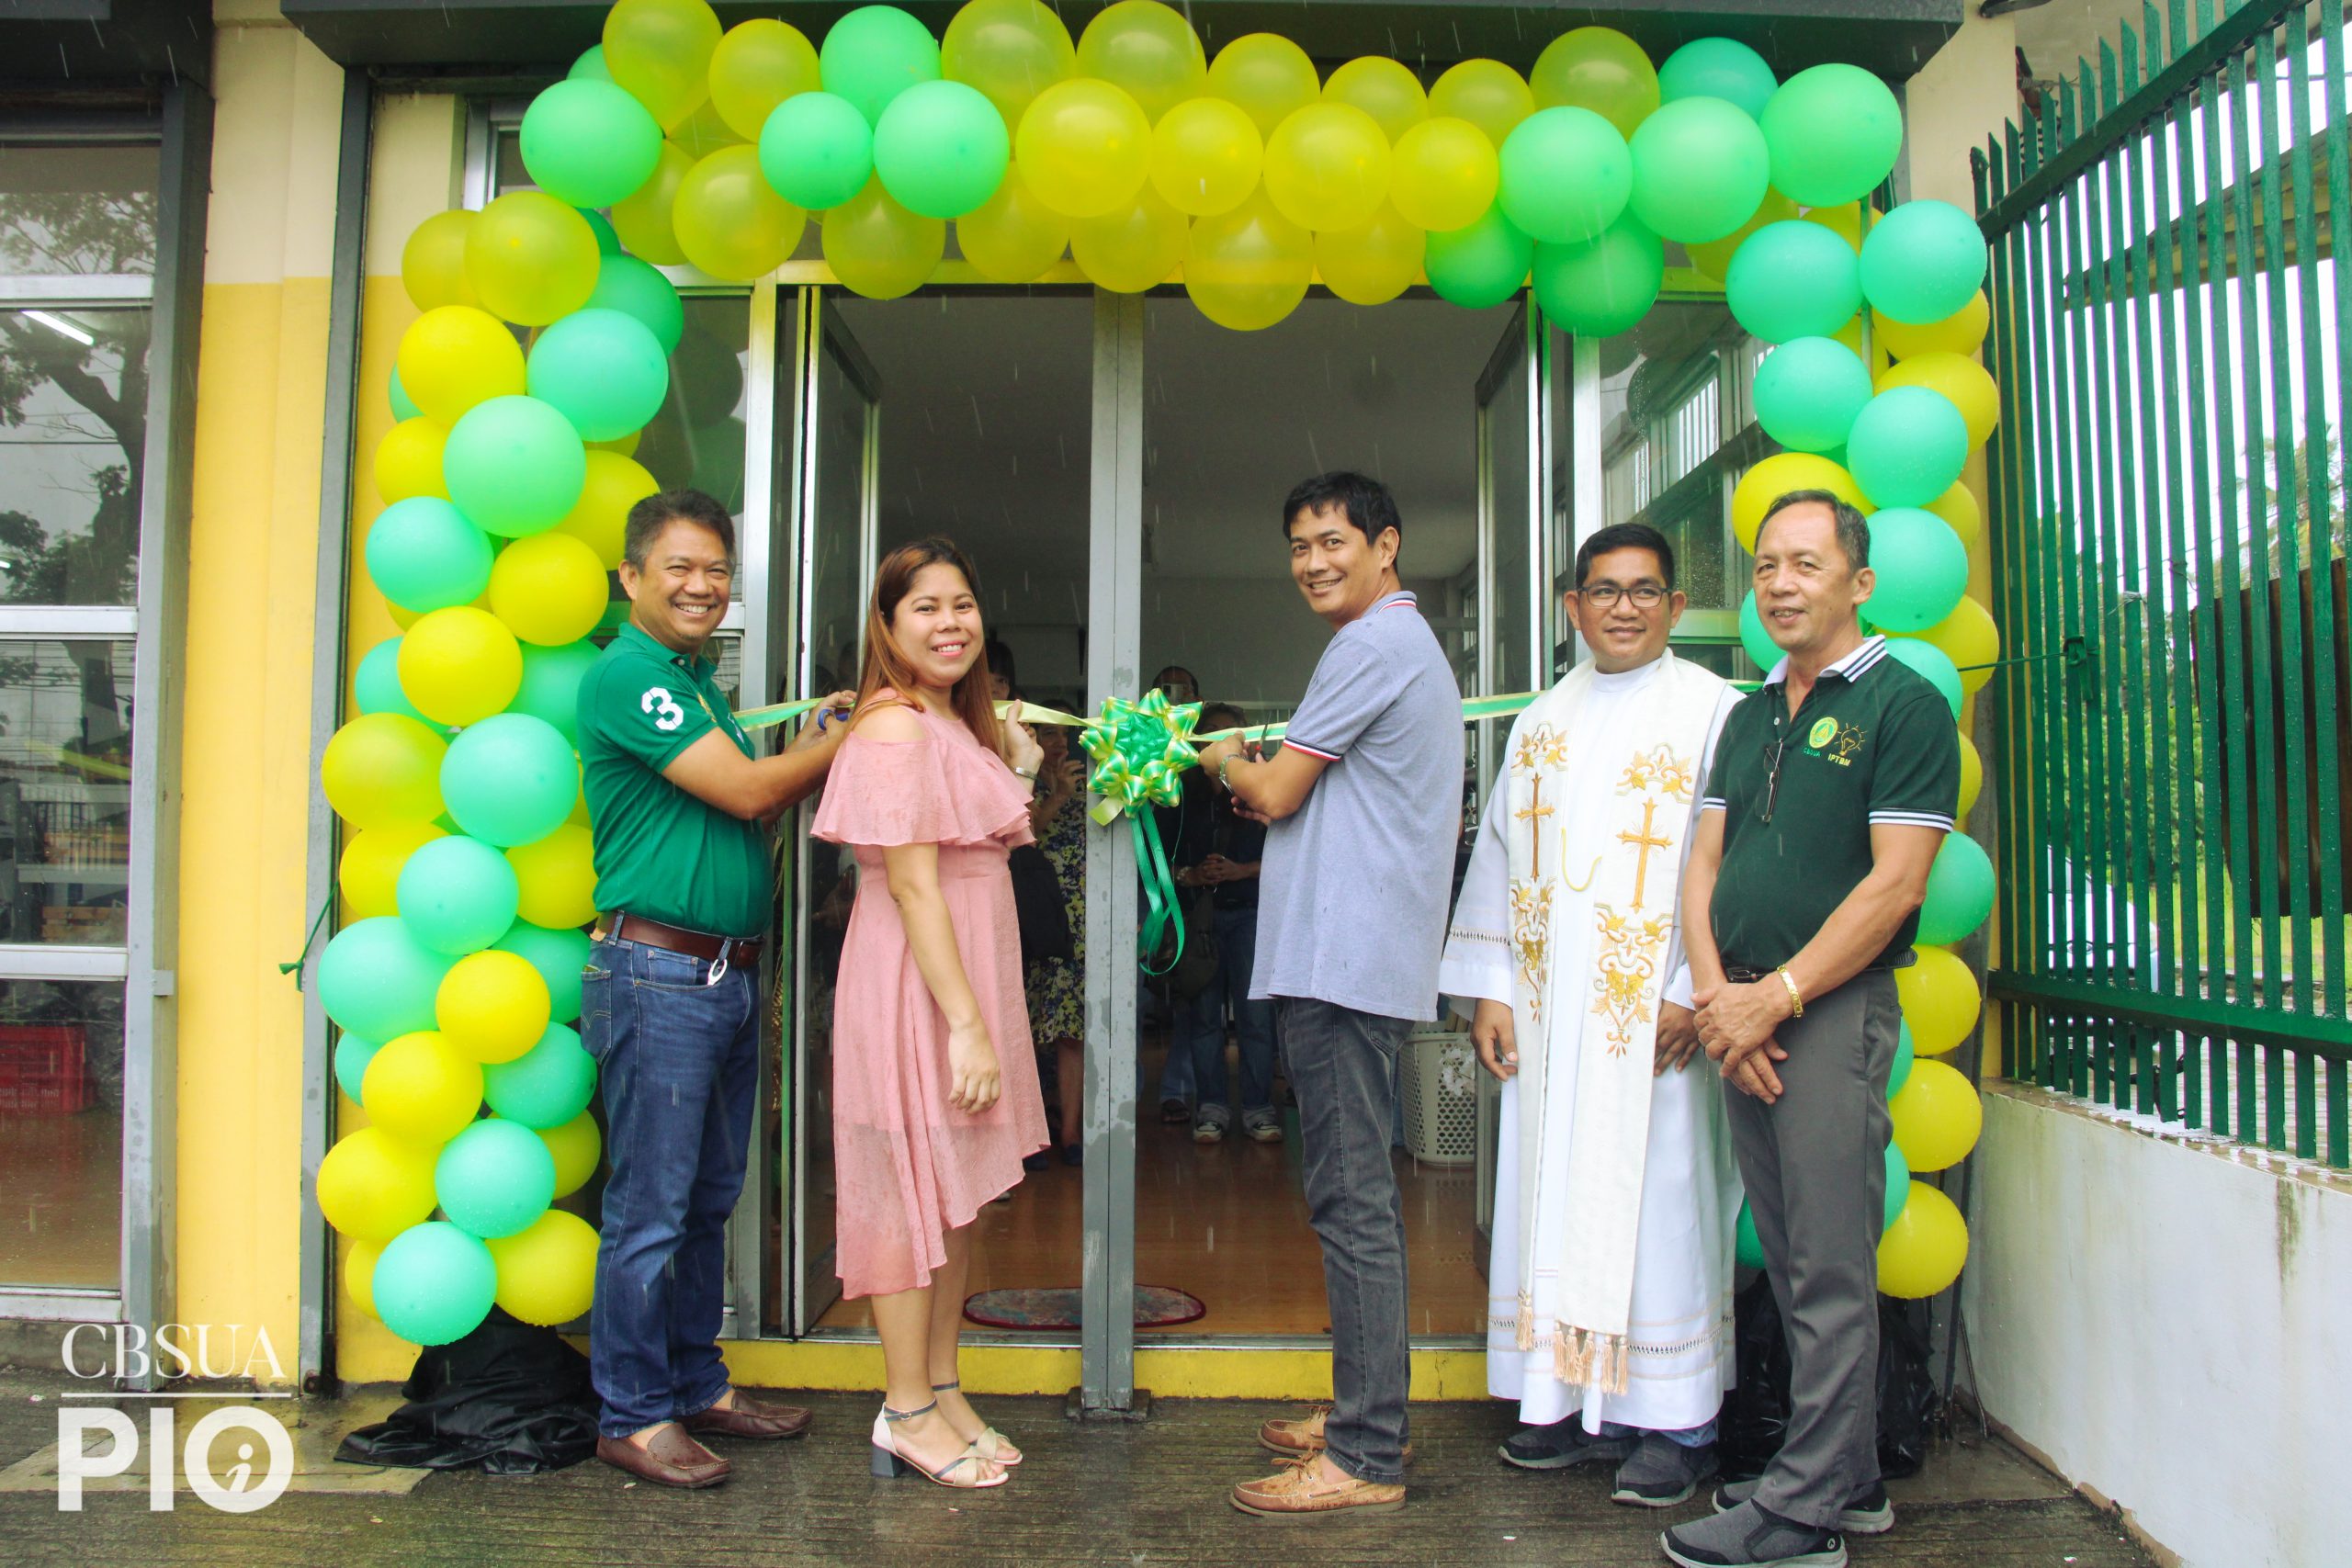 CBSUA LAUNCHES ENTREPRENEURIAL DEVELOPMENT AND INNOVATION CENTER IN BLESSING AND SOFT OPENING PROGRAM